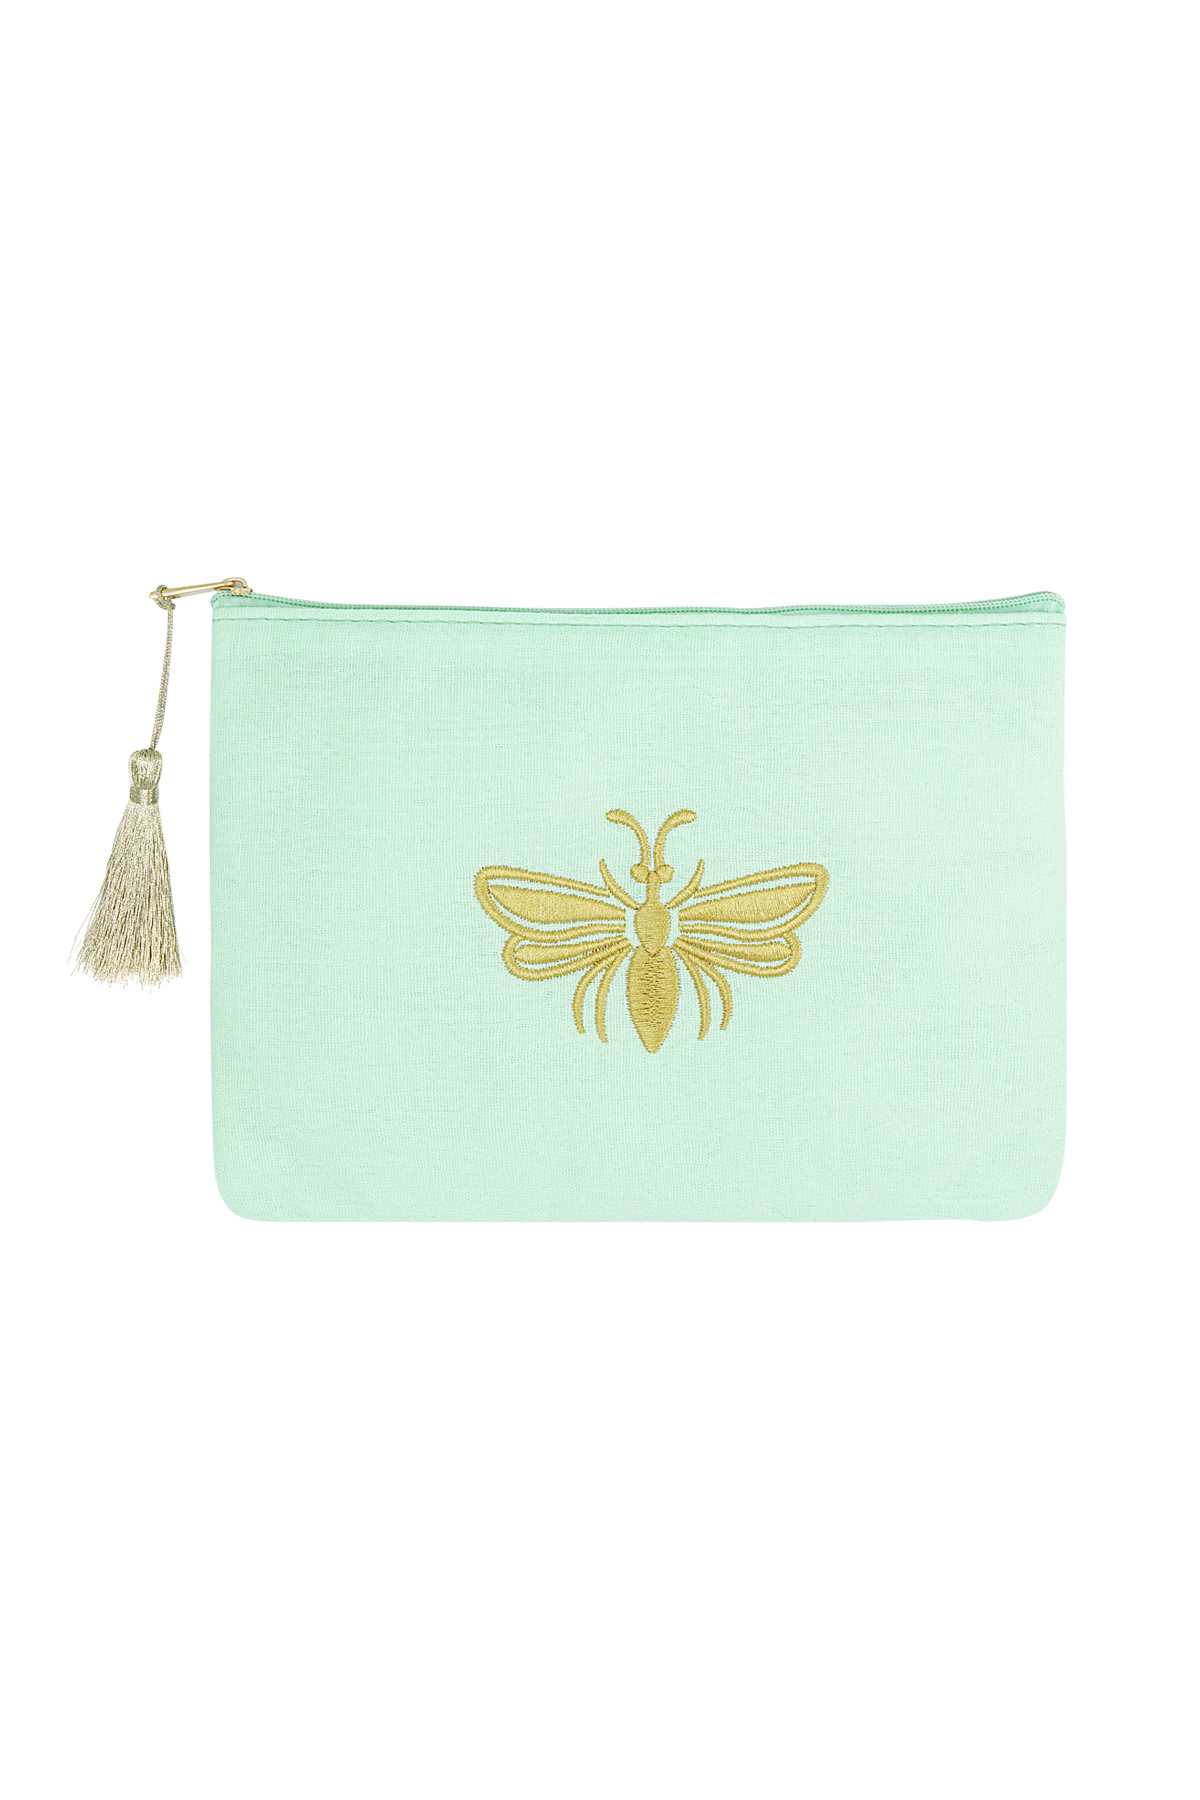 Make-up bag with golden bee - mint